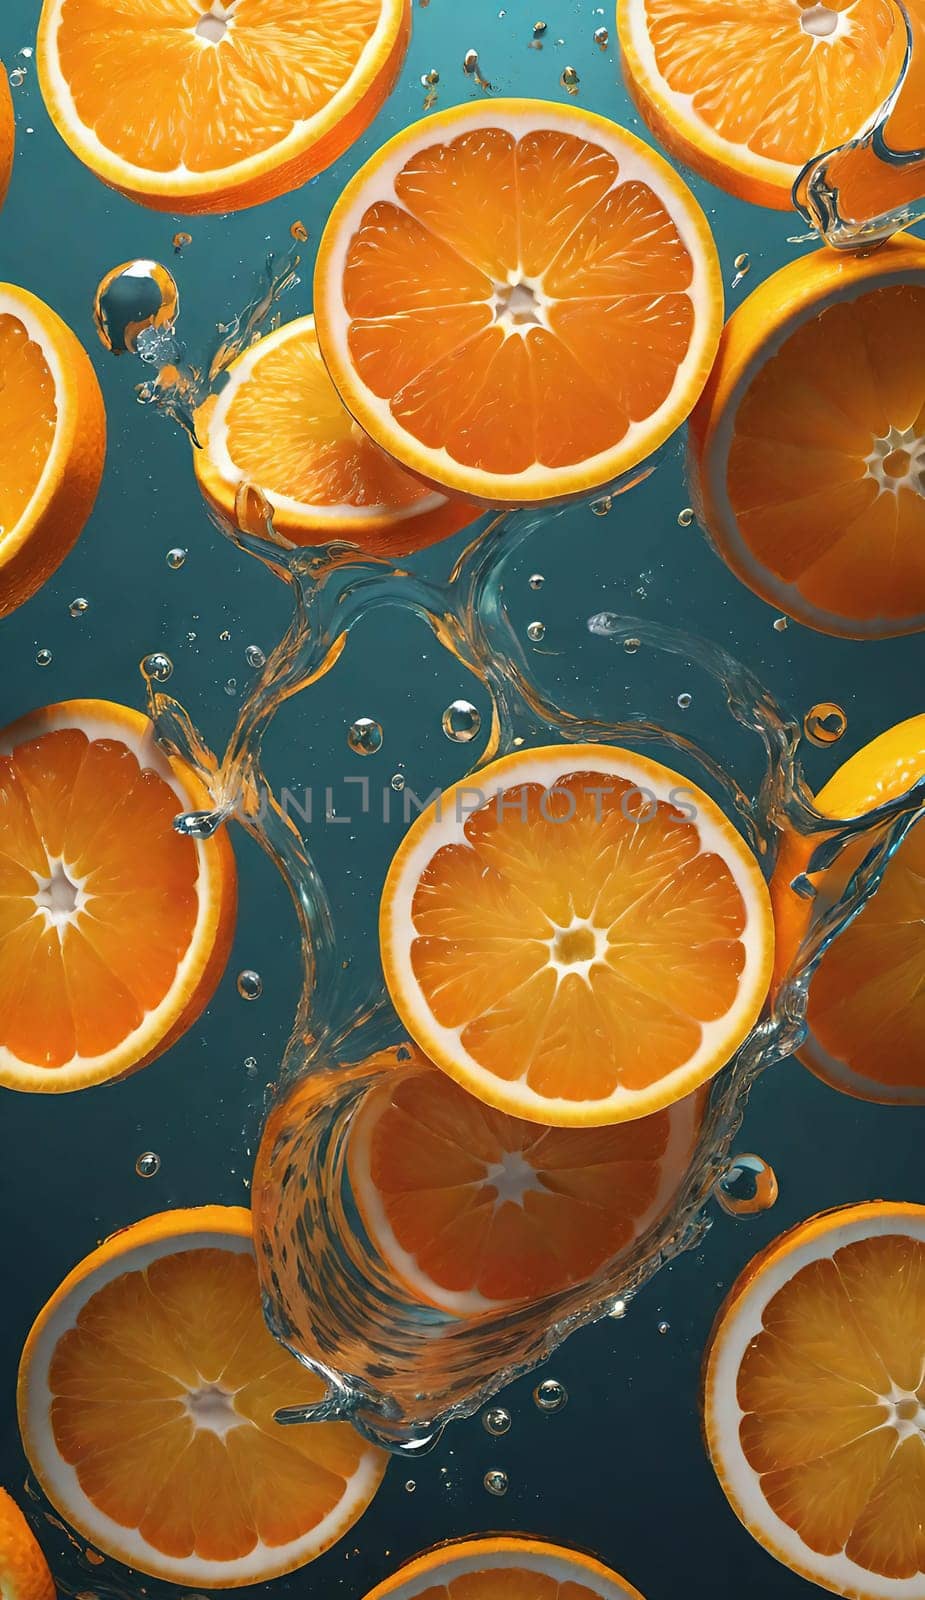 Fresh orange falling into water with splash on background, closeup.Orange in water splash on background. Concept of freshness and healthy eating.Fresh orange slice falling into water with splash on background,